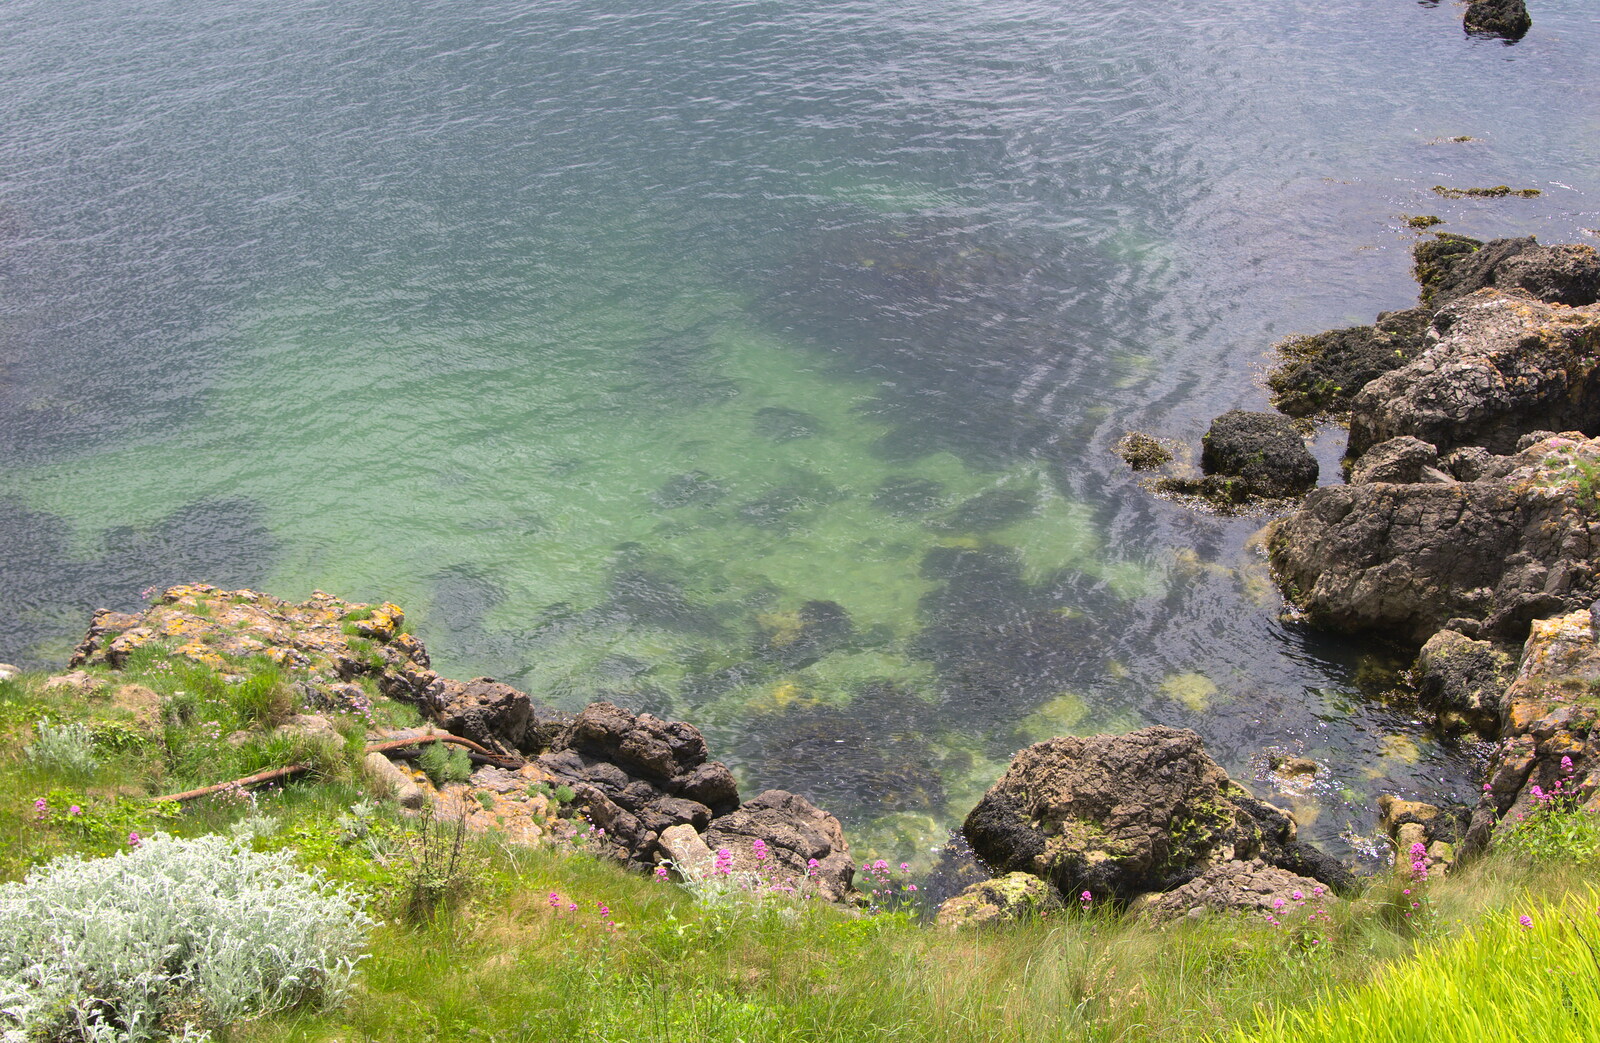 The almost-tropical waters of the Sound from A Tamar River Trip, Plymouth, Devon - 30th May 2016